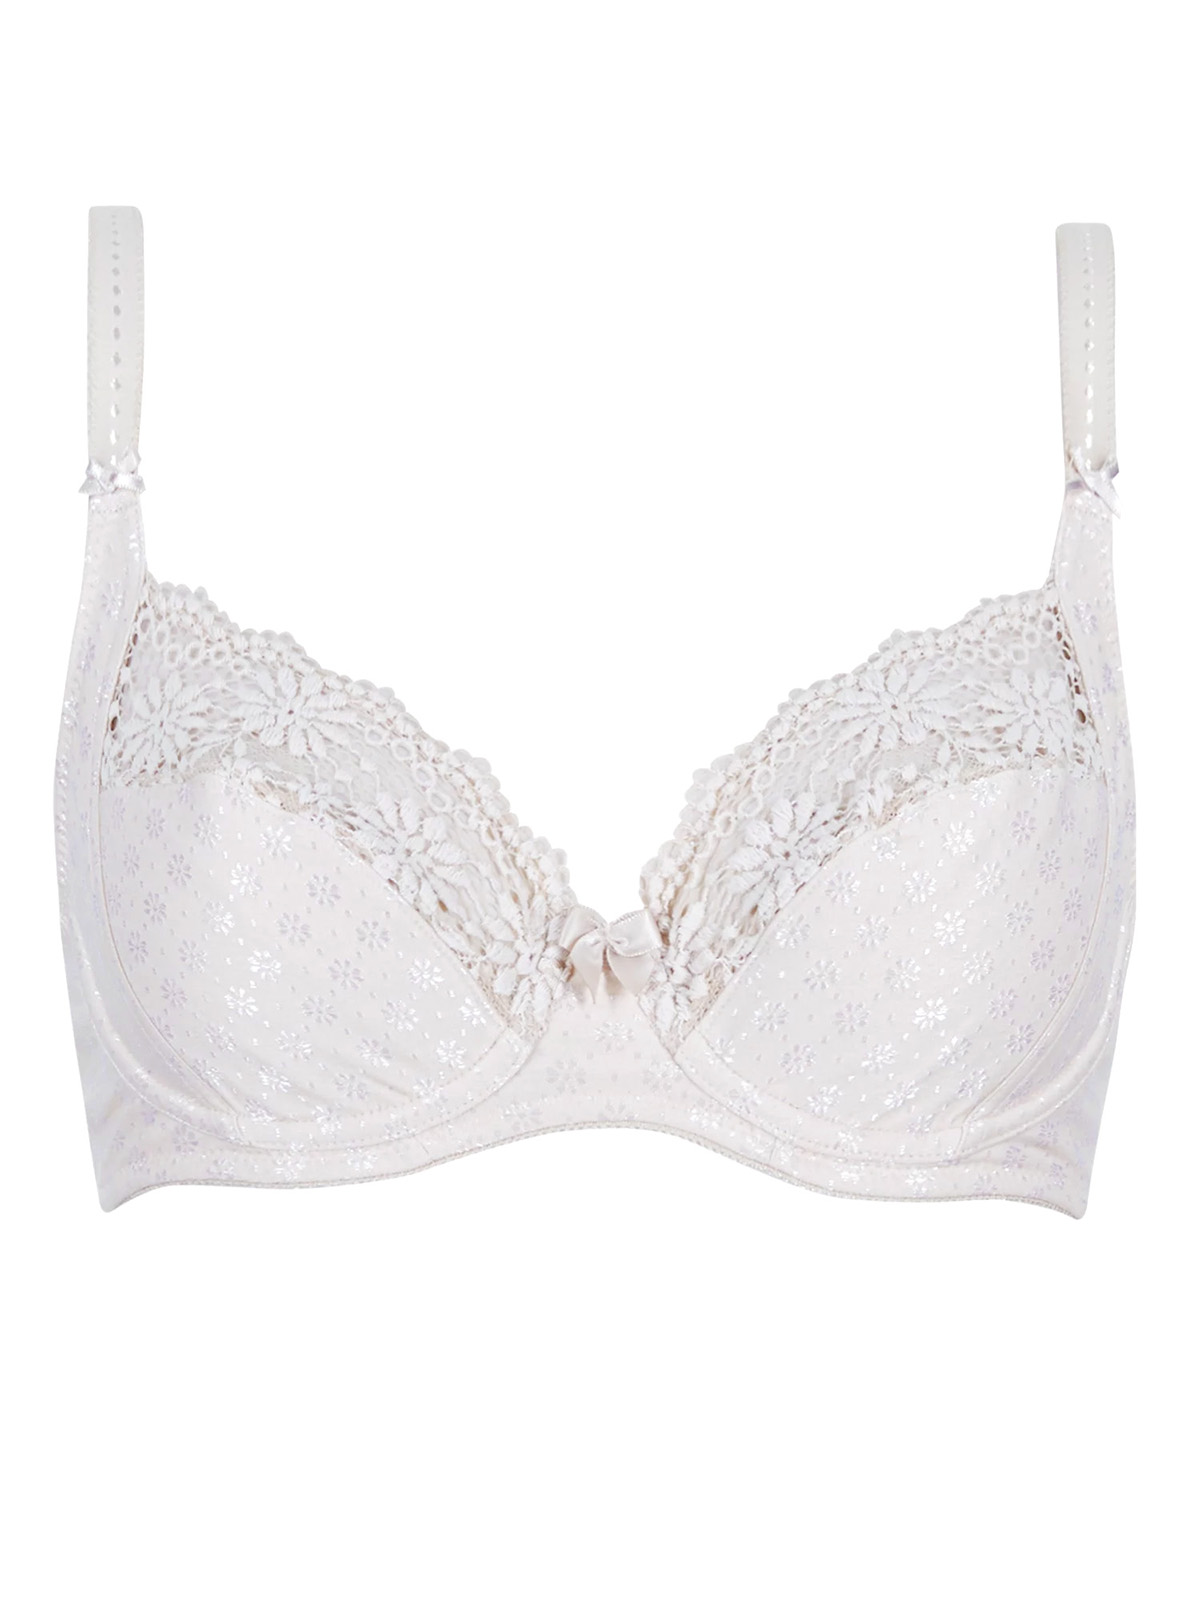 Marks and Spencer - - M&5 ASSORTED Full Cup & Strapless Bras - Size 32 ...